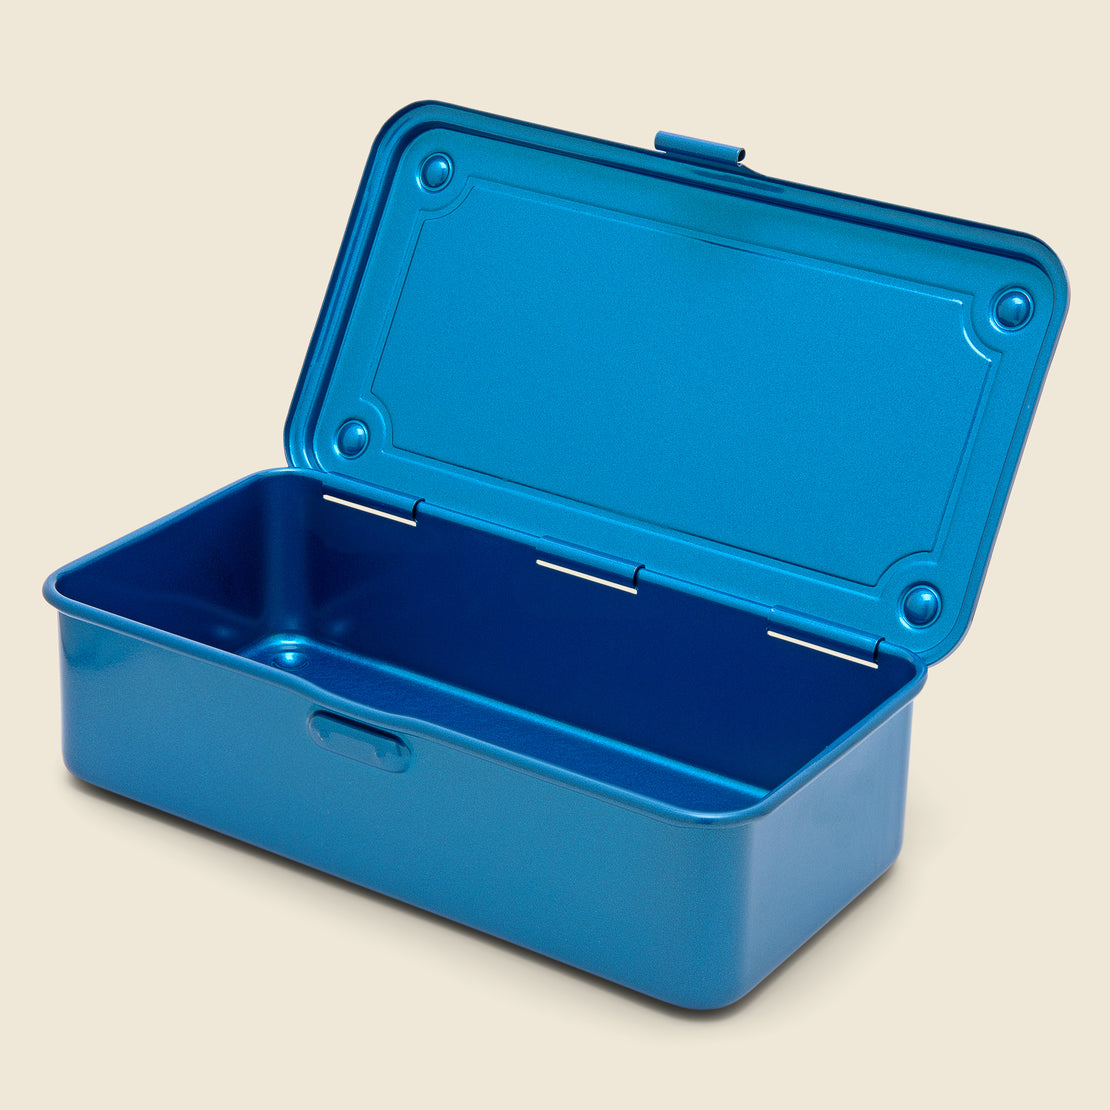 Stackable Storage Box - Blue - Home - STAG Provisions - Home - Kitchen - Storage